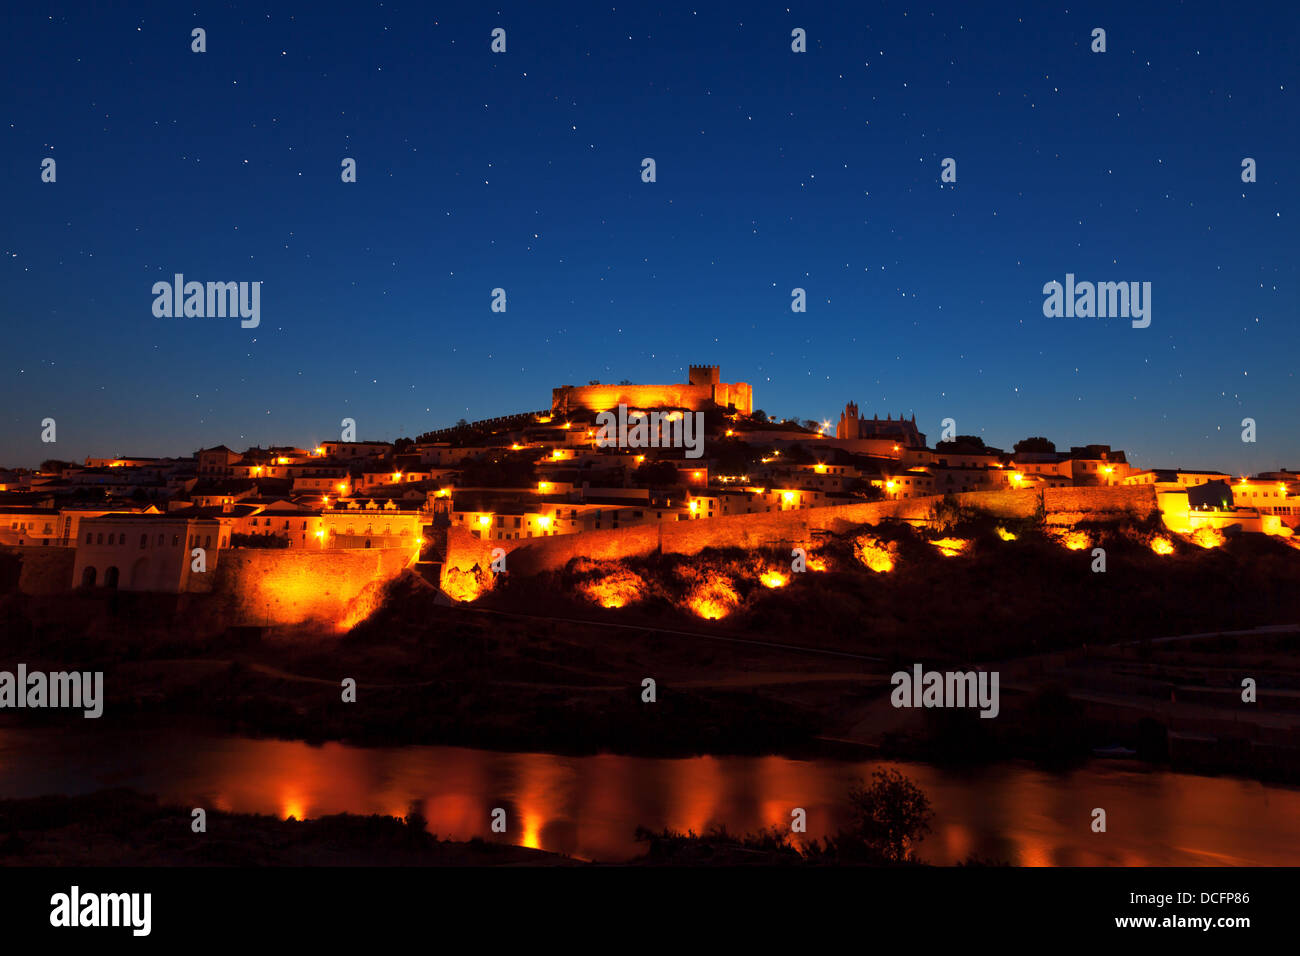 Walled town illuminated at night reflected in still water with a fortified castle on the brow of the hill overlooking the town Stock Photo